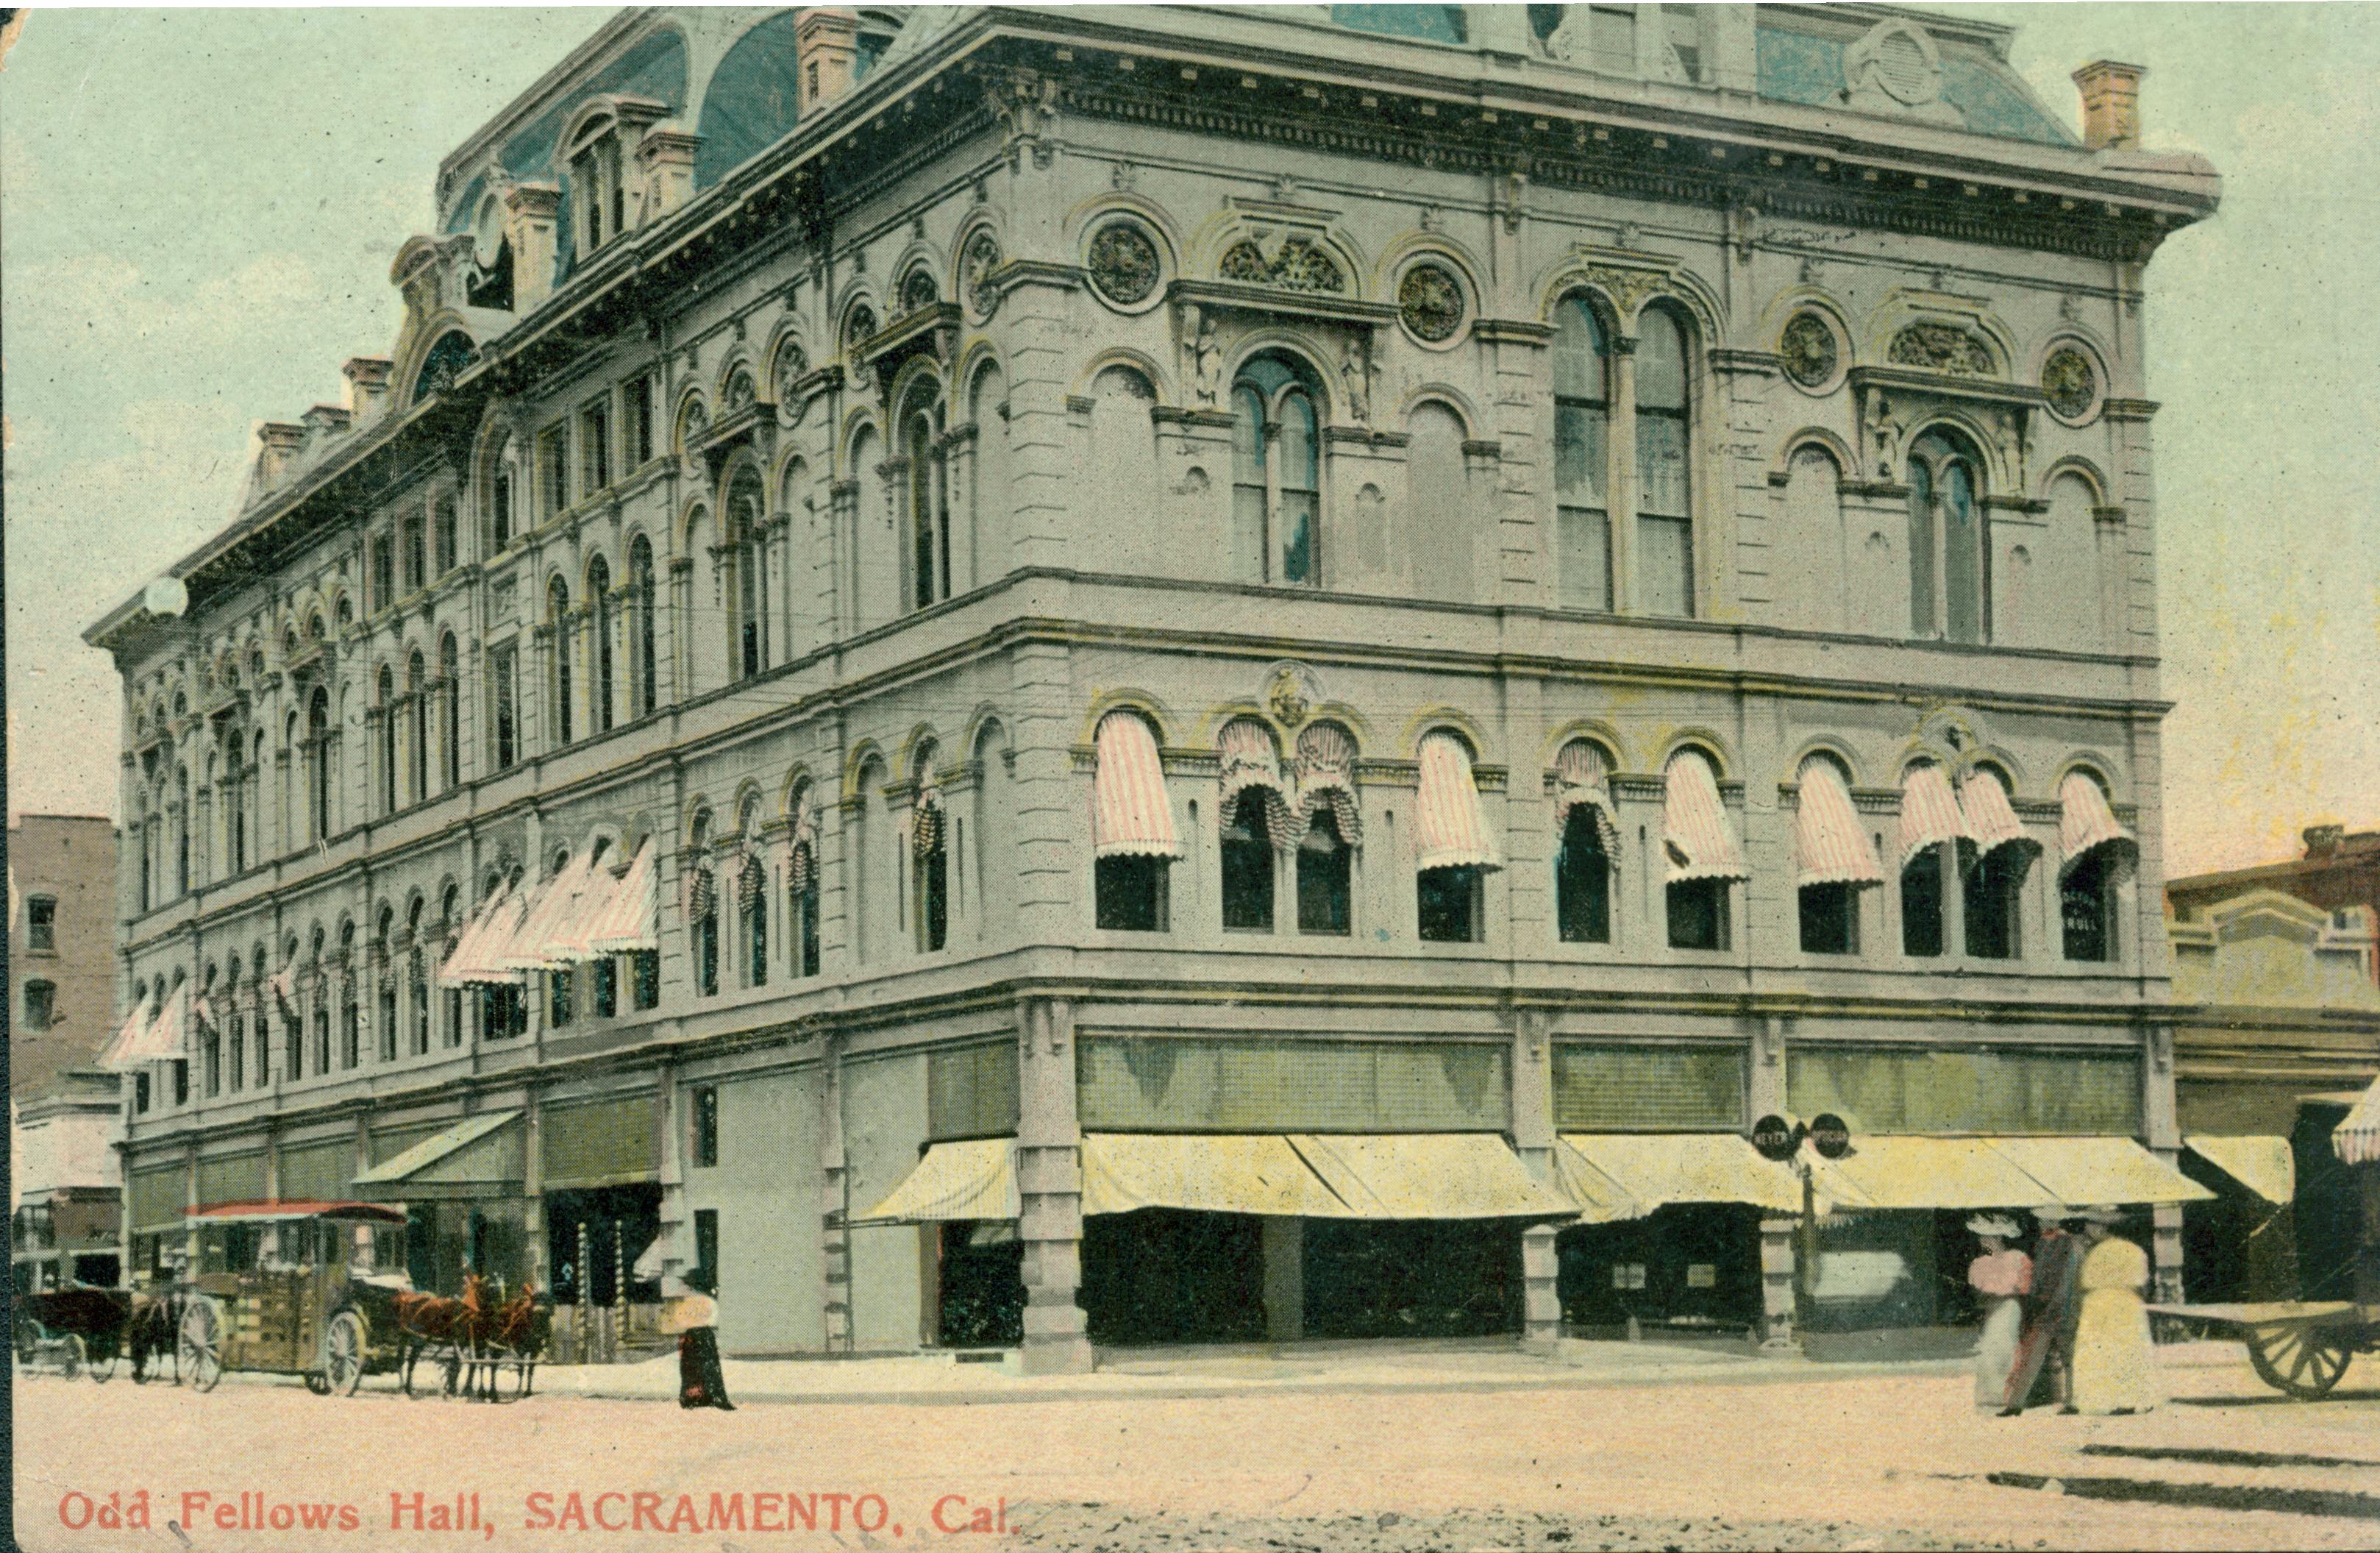 This postcard shows a corner view of the Odd Fellows Hall in Sacramento.